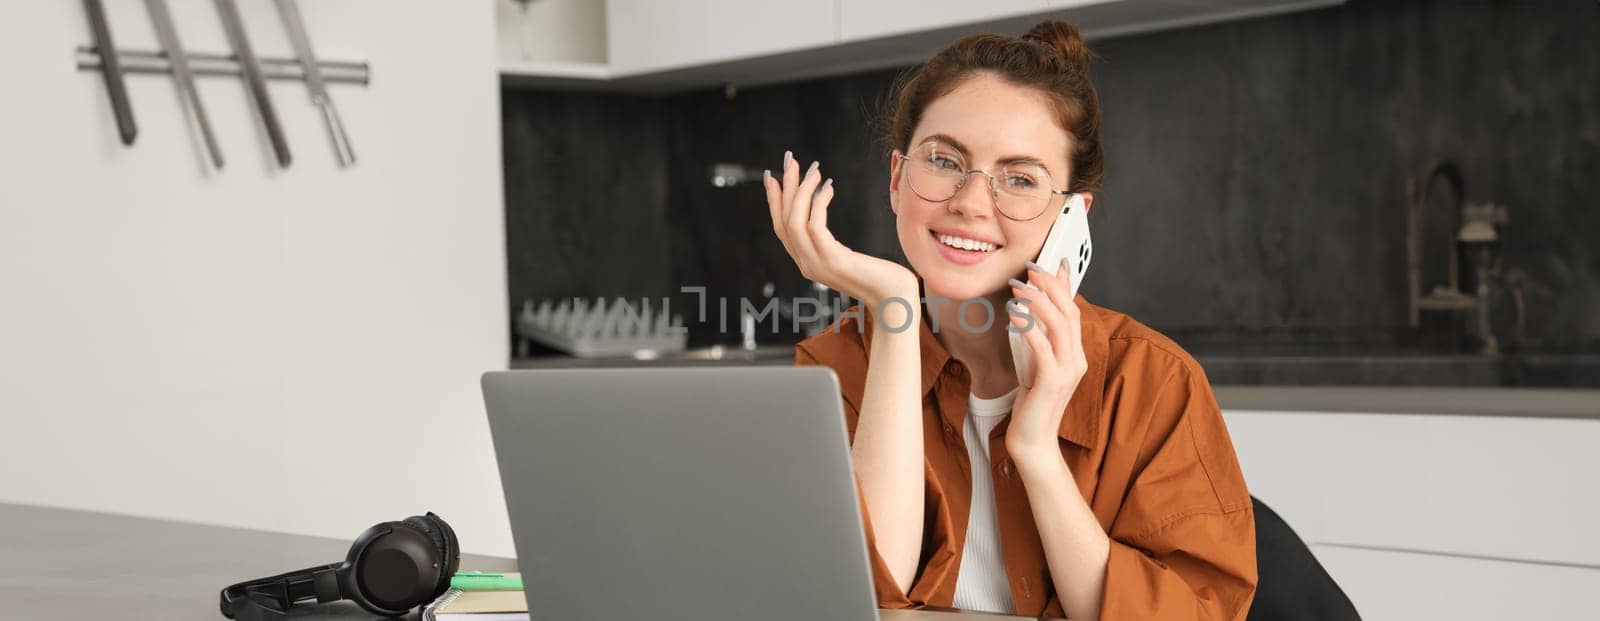 Portrait of beautiful smiling woman working from home, talking on mobile phone, calling client, self-employed businesswoman sets up workplace in kitchen, using laptop and smartphone.